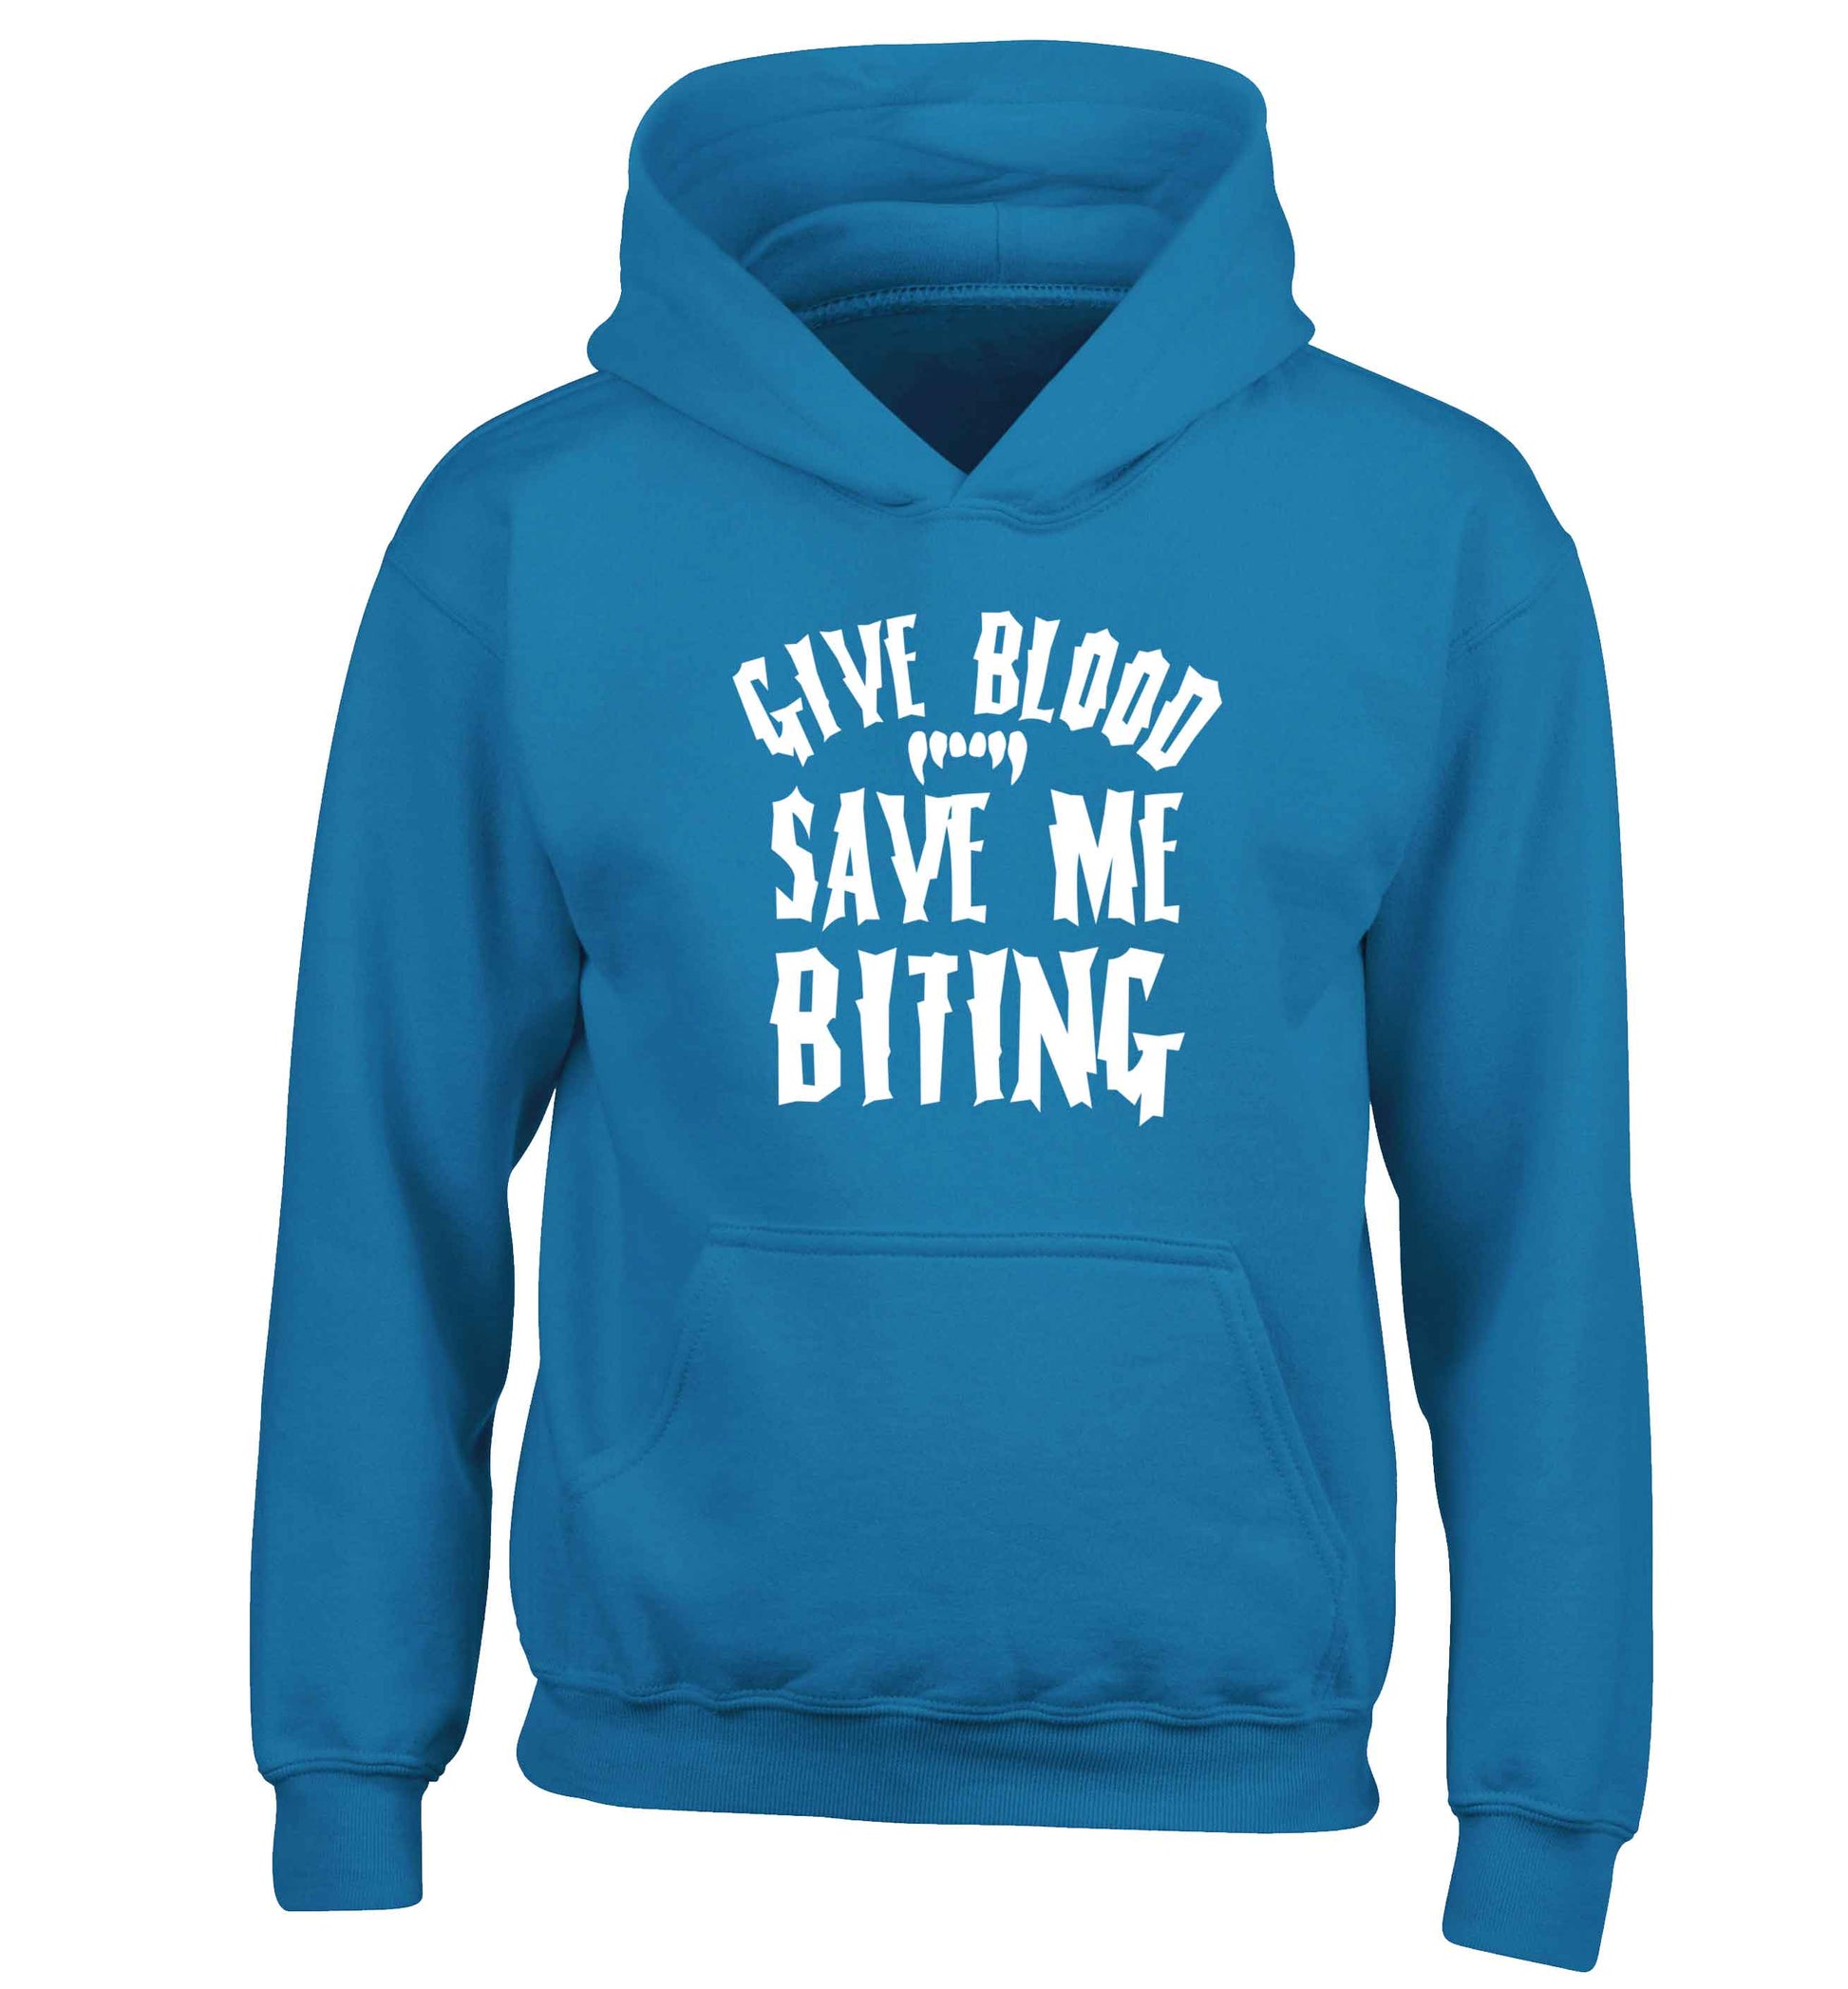 Give blood save me biting children's blue hoodie 12-13 Years